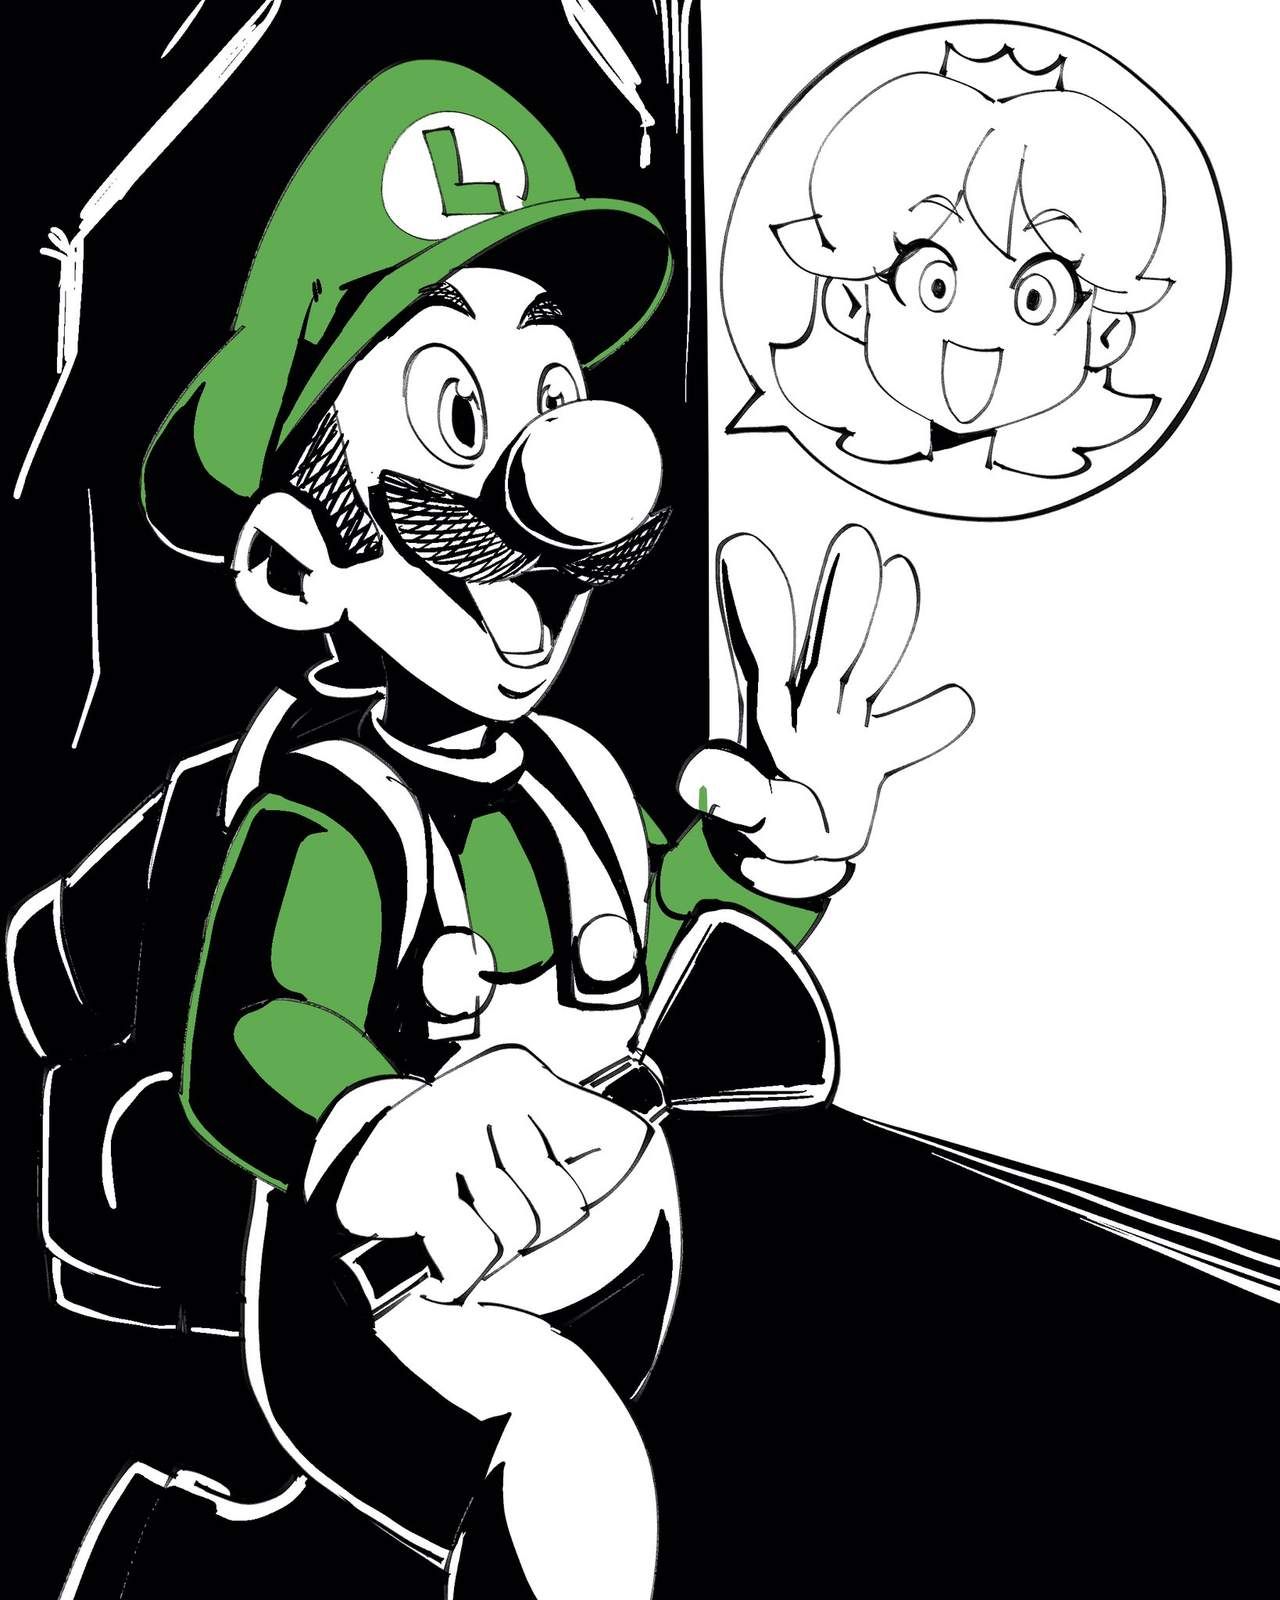 [Nisego] Inktober 2019 (Super Mario Brothers) [Ongoing] 10